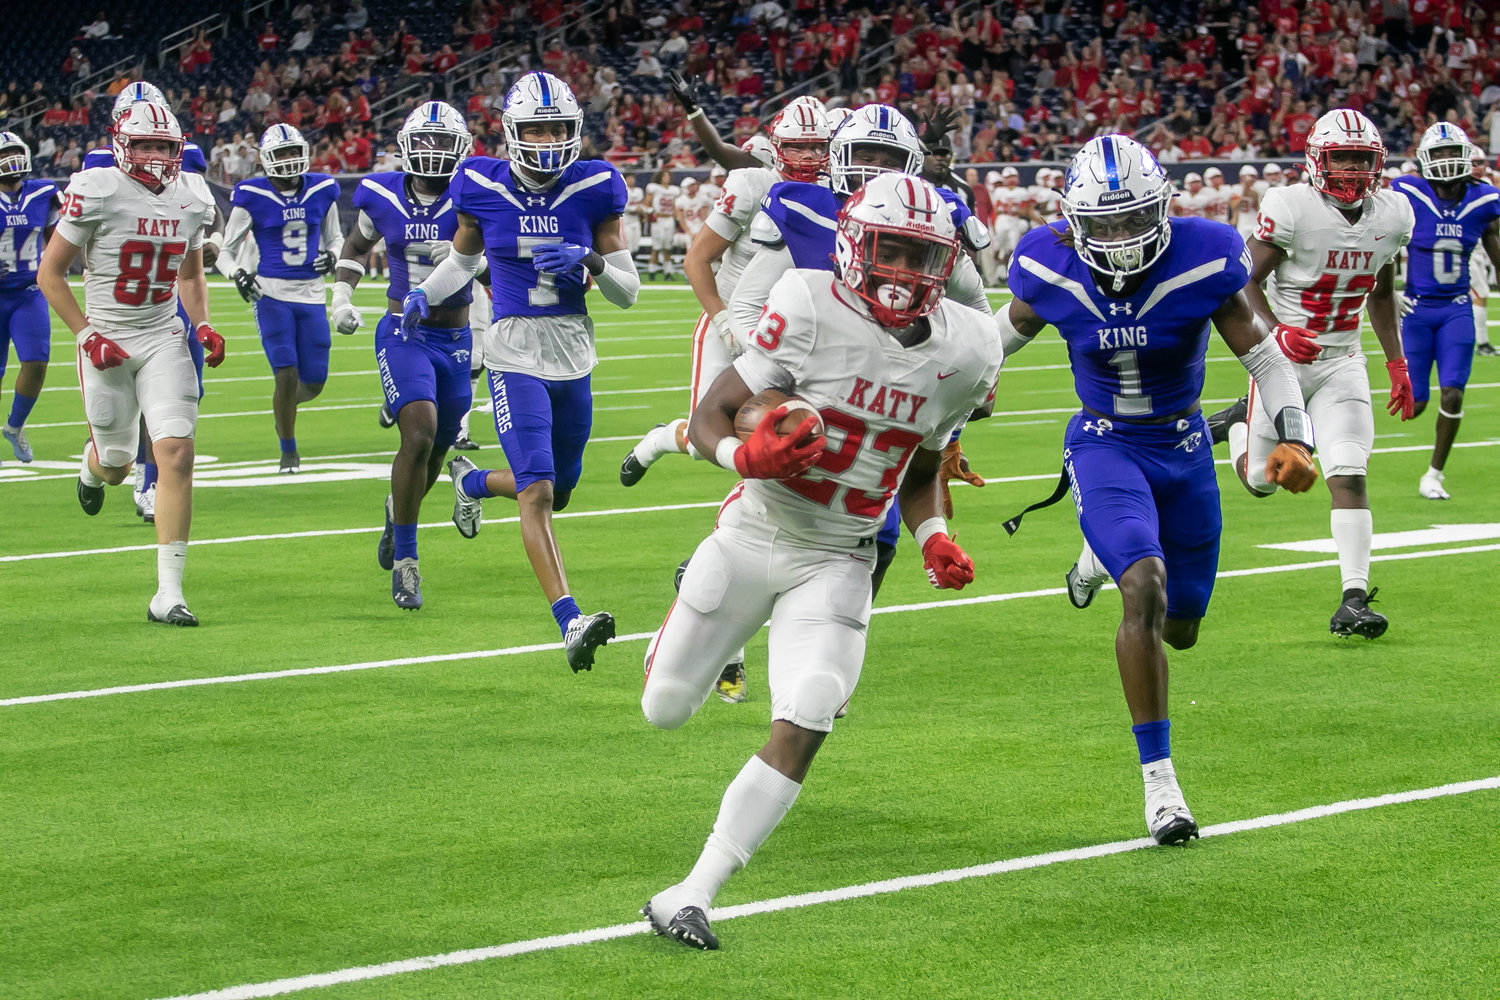 Seth Davis runs in a touchdown during Friday's Class 6A-Division II Region III Final between Katy and C.E. King at NRG Stadium.